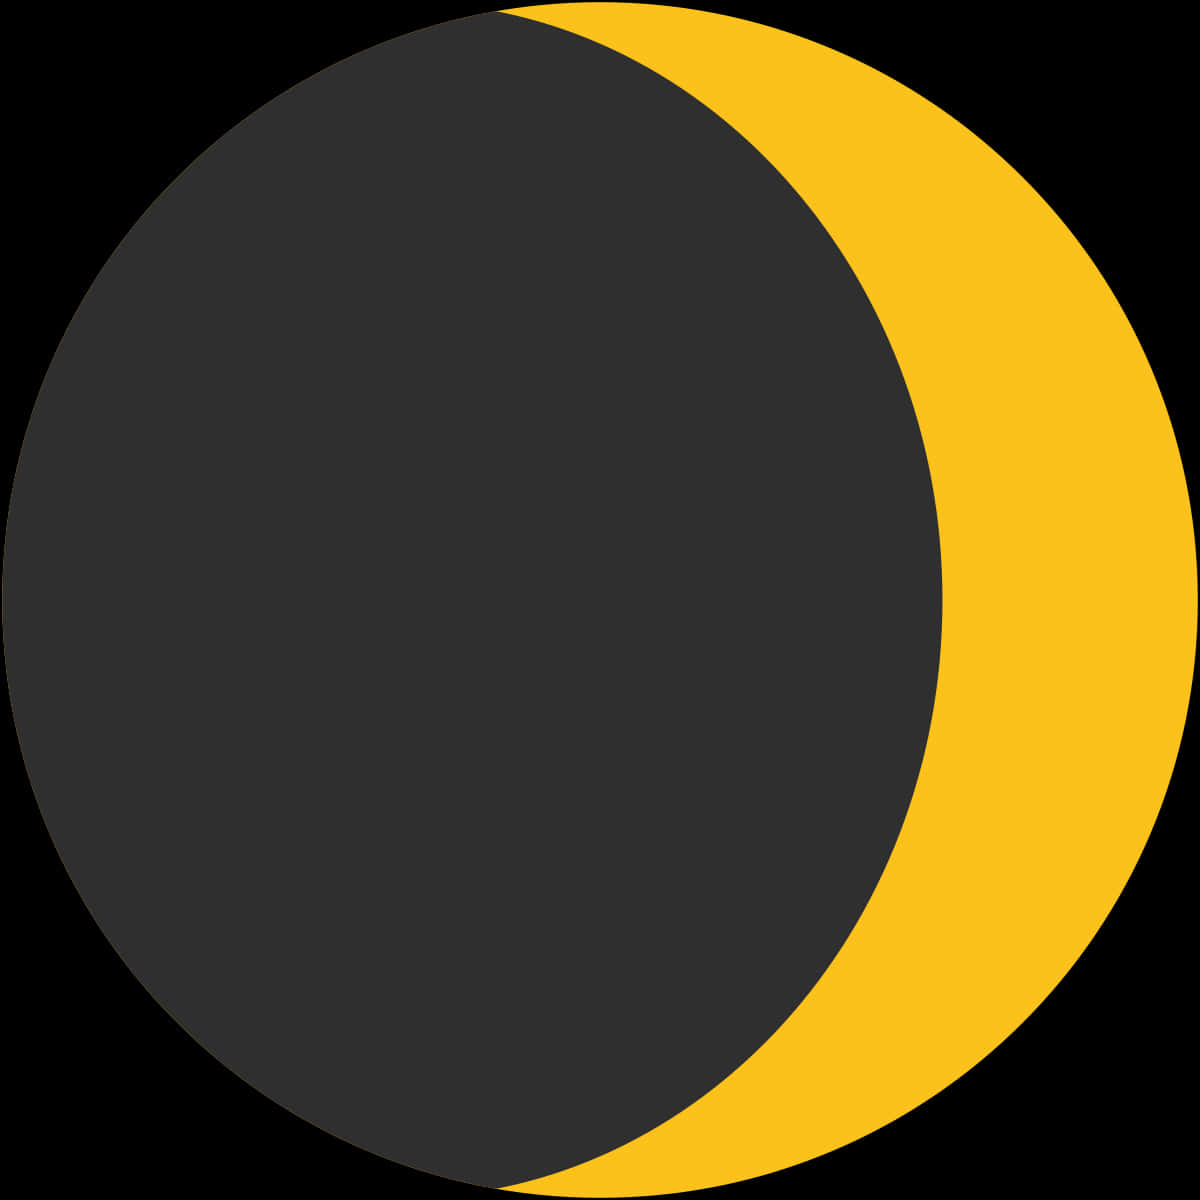 A Black And Yellow Crescent Moon